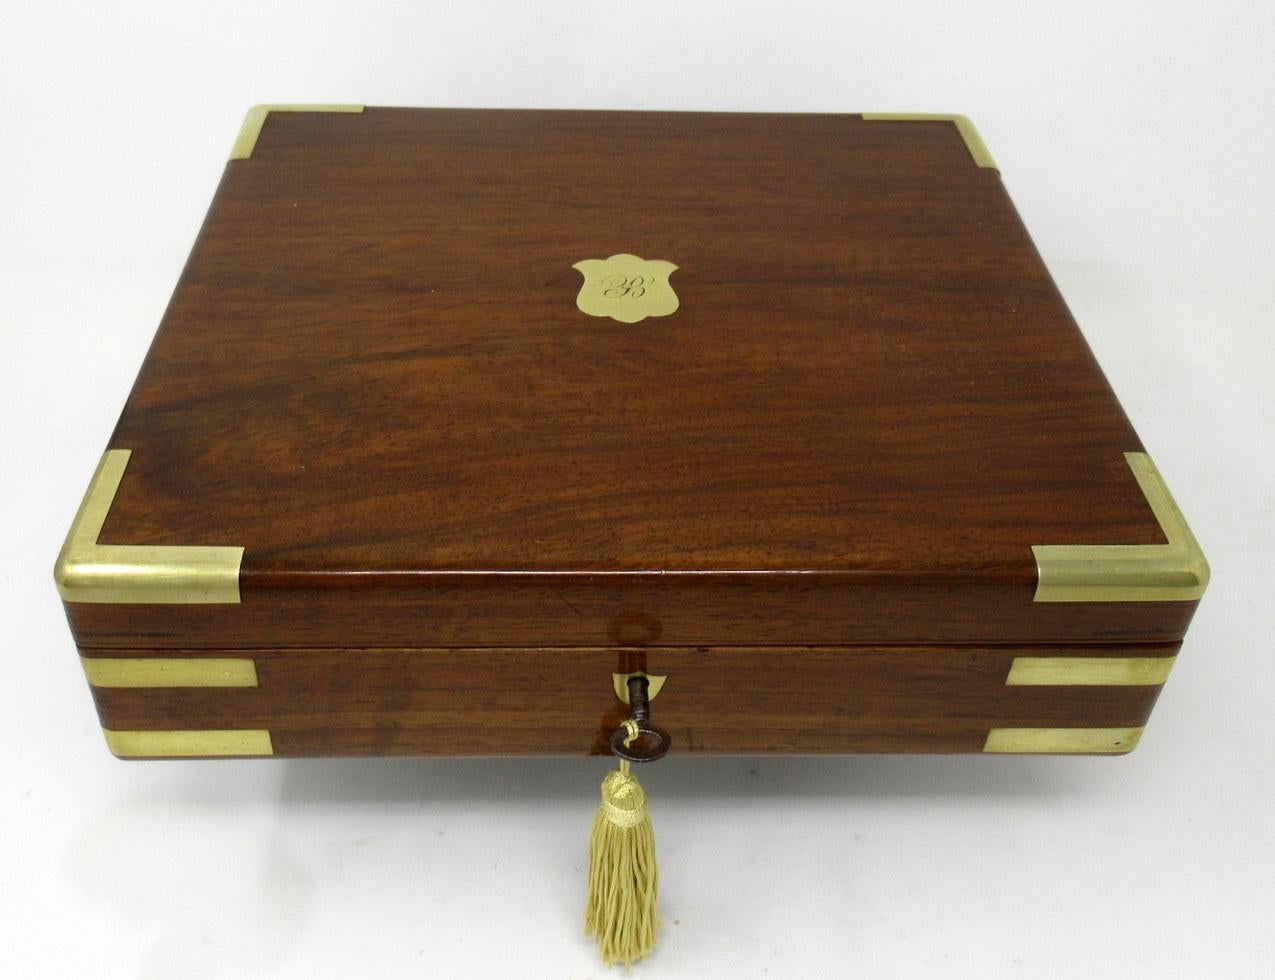 An exceptionally fine quality English well figured solid mahogany ladies or gents jewelry or storage box outstanding quality and medium proportions, with unusual moulded brass inlay decoration, flush hinges and polished brass shield form escutcheon,